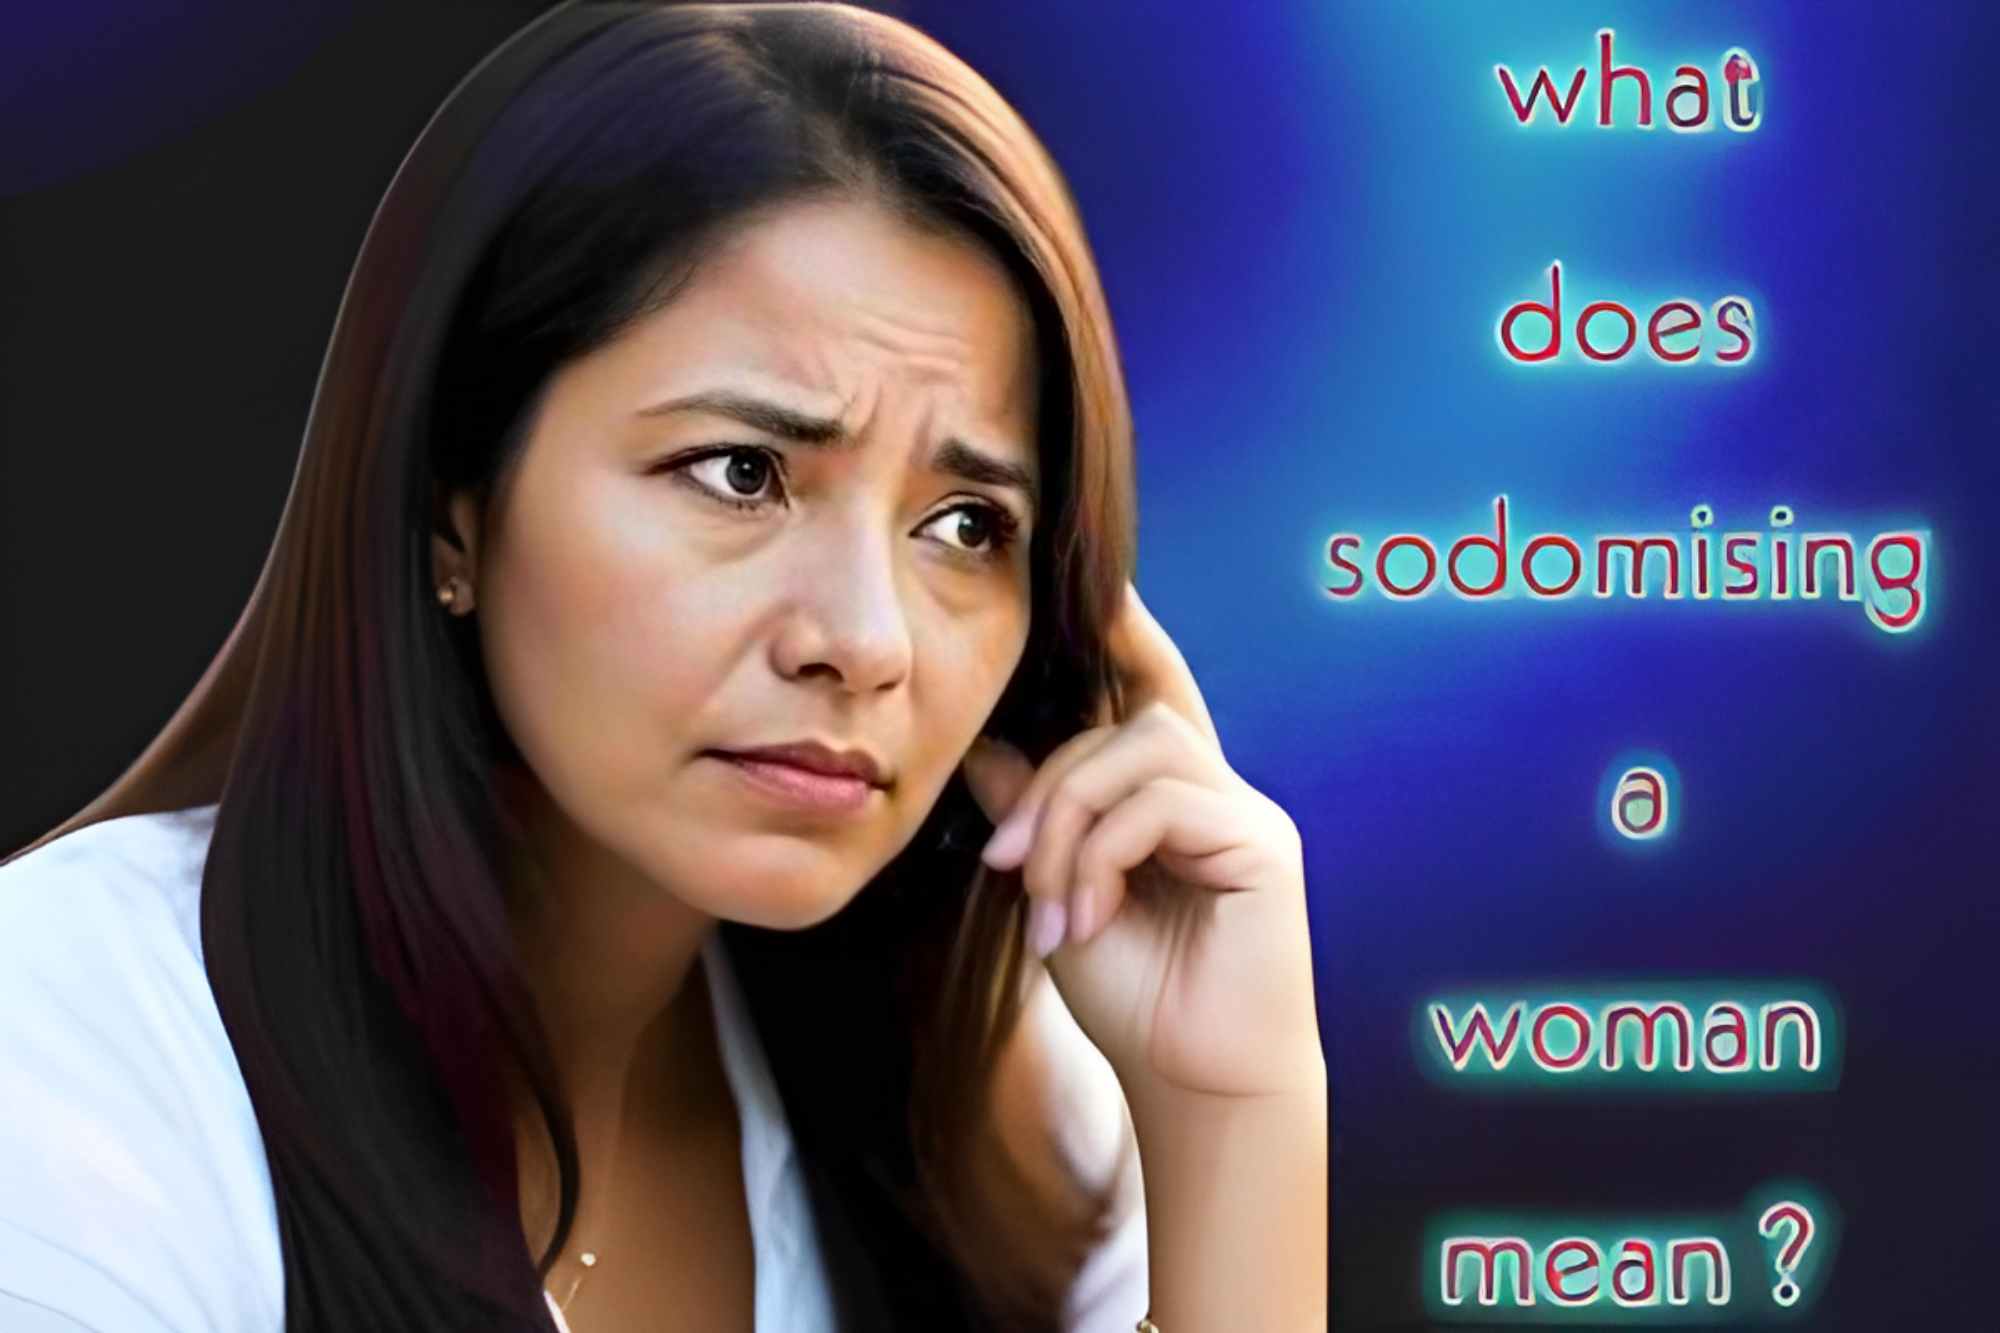 what does sodomising a woman mean